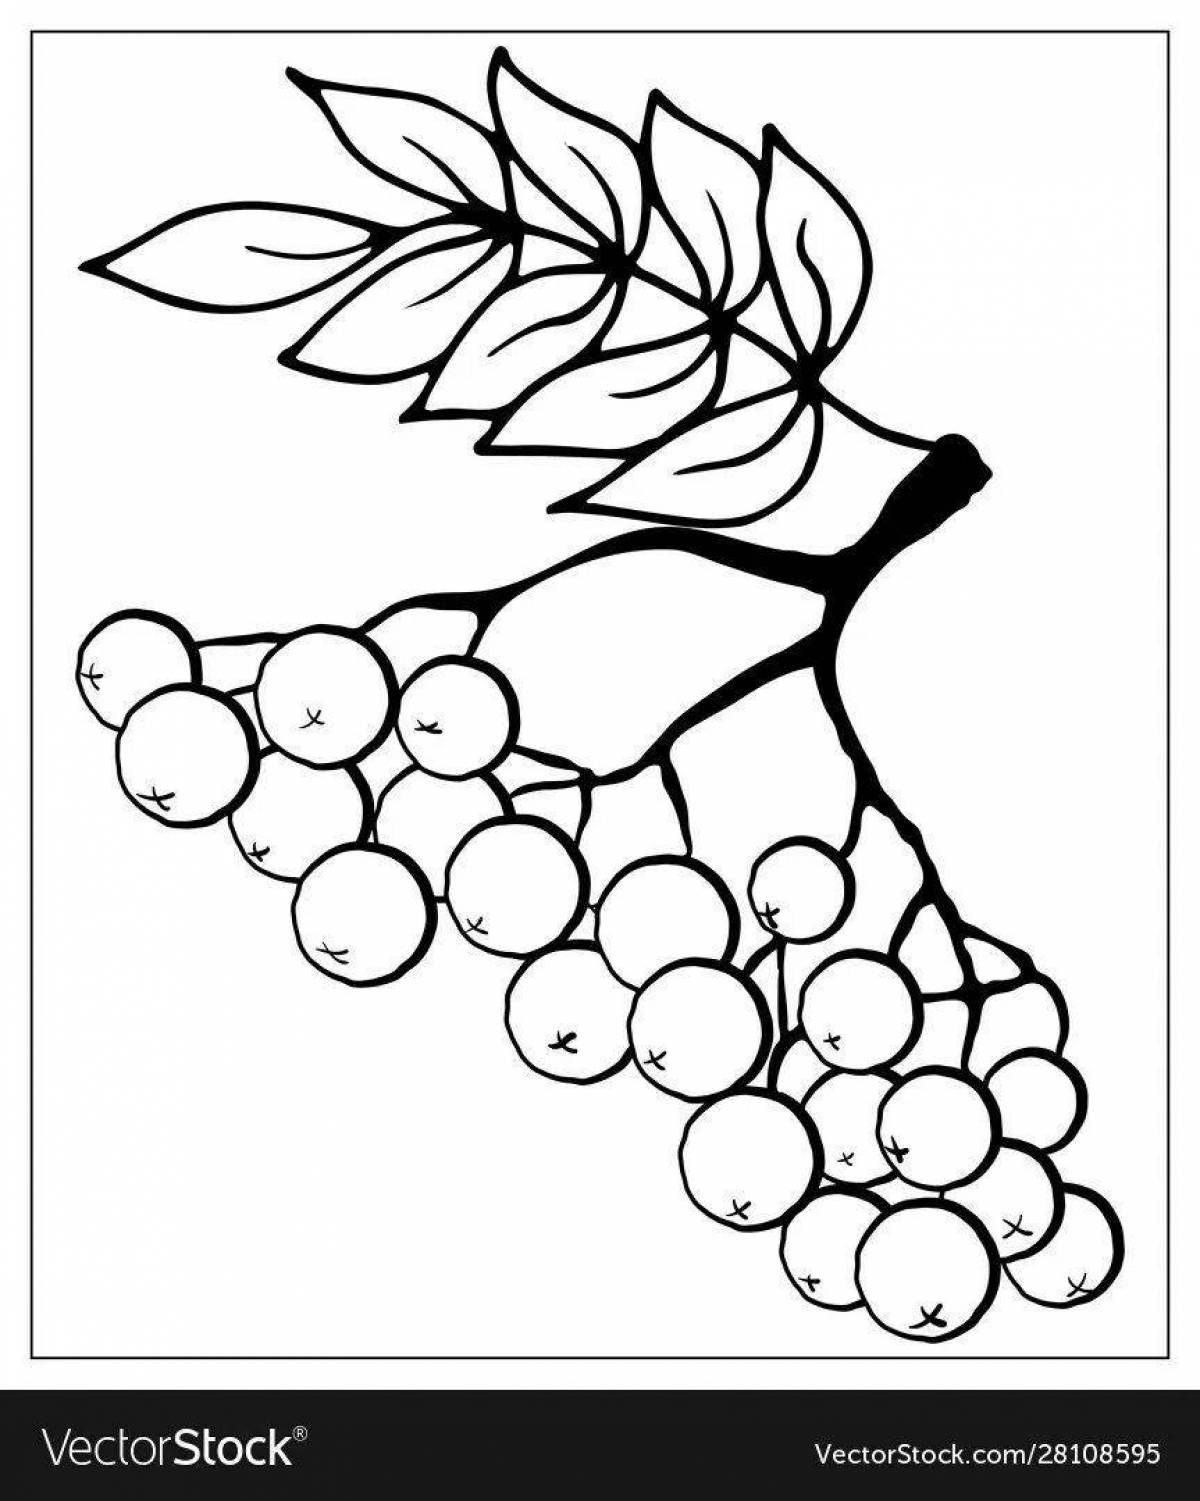 Amazing rowan branch coloring for kids